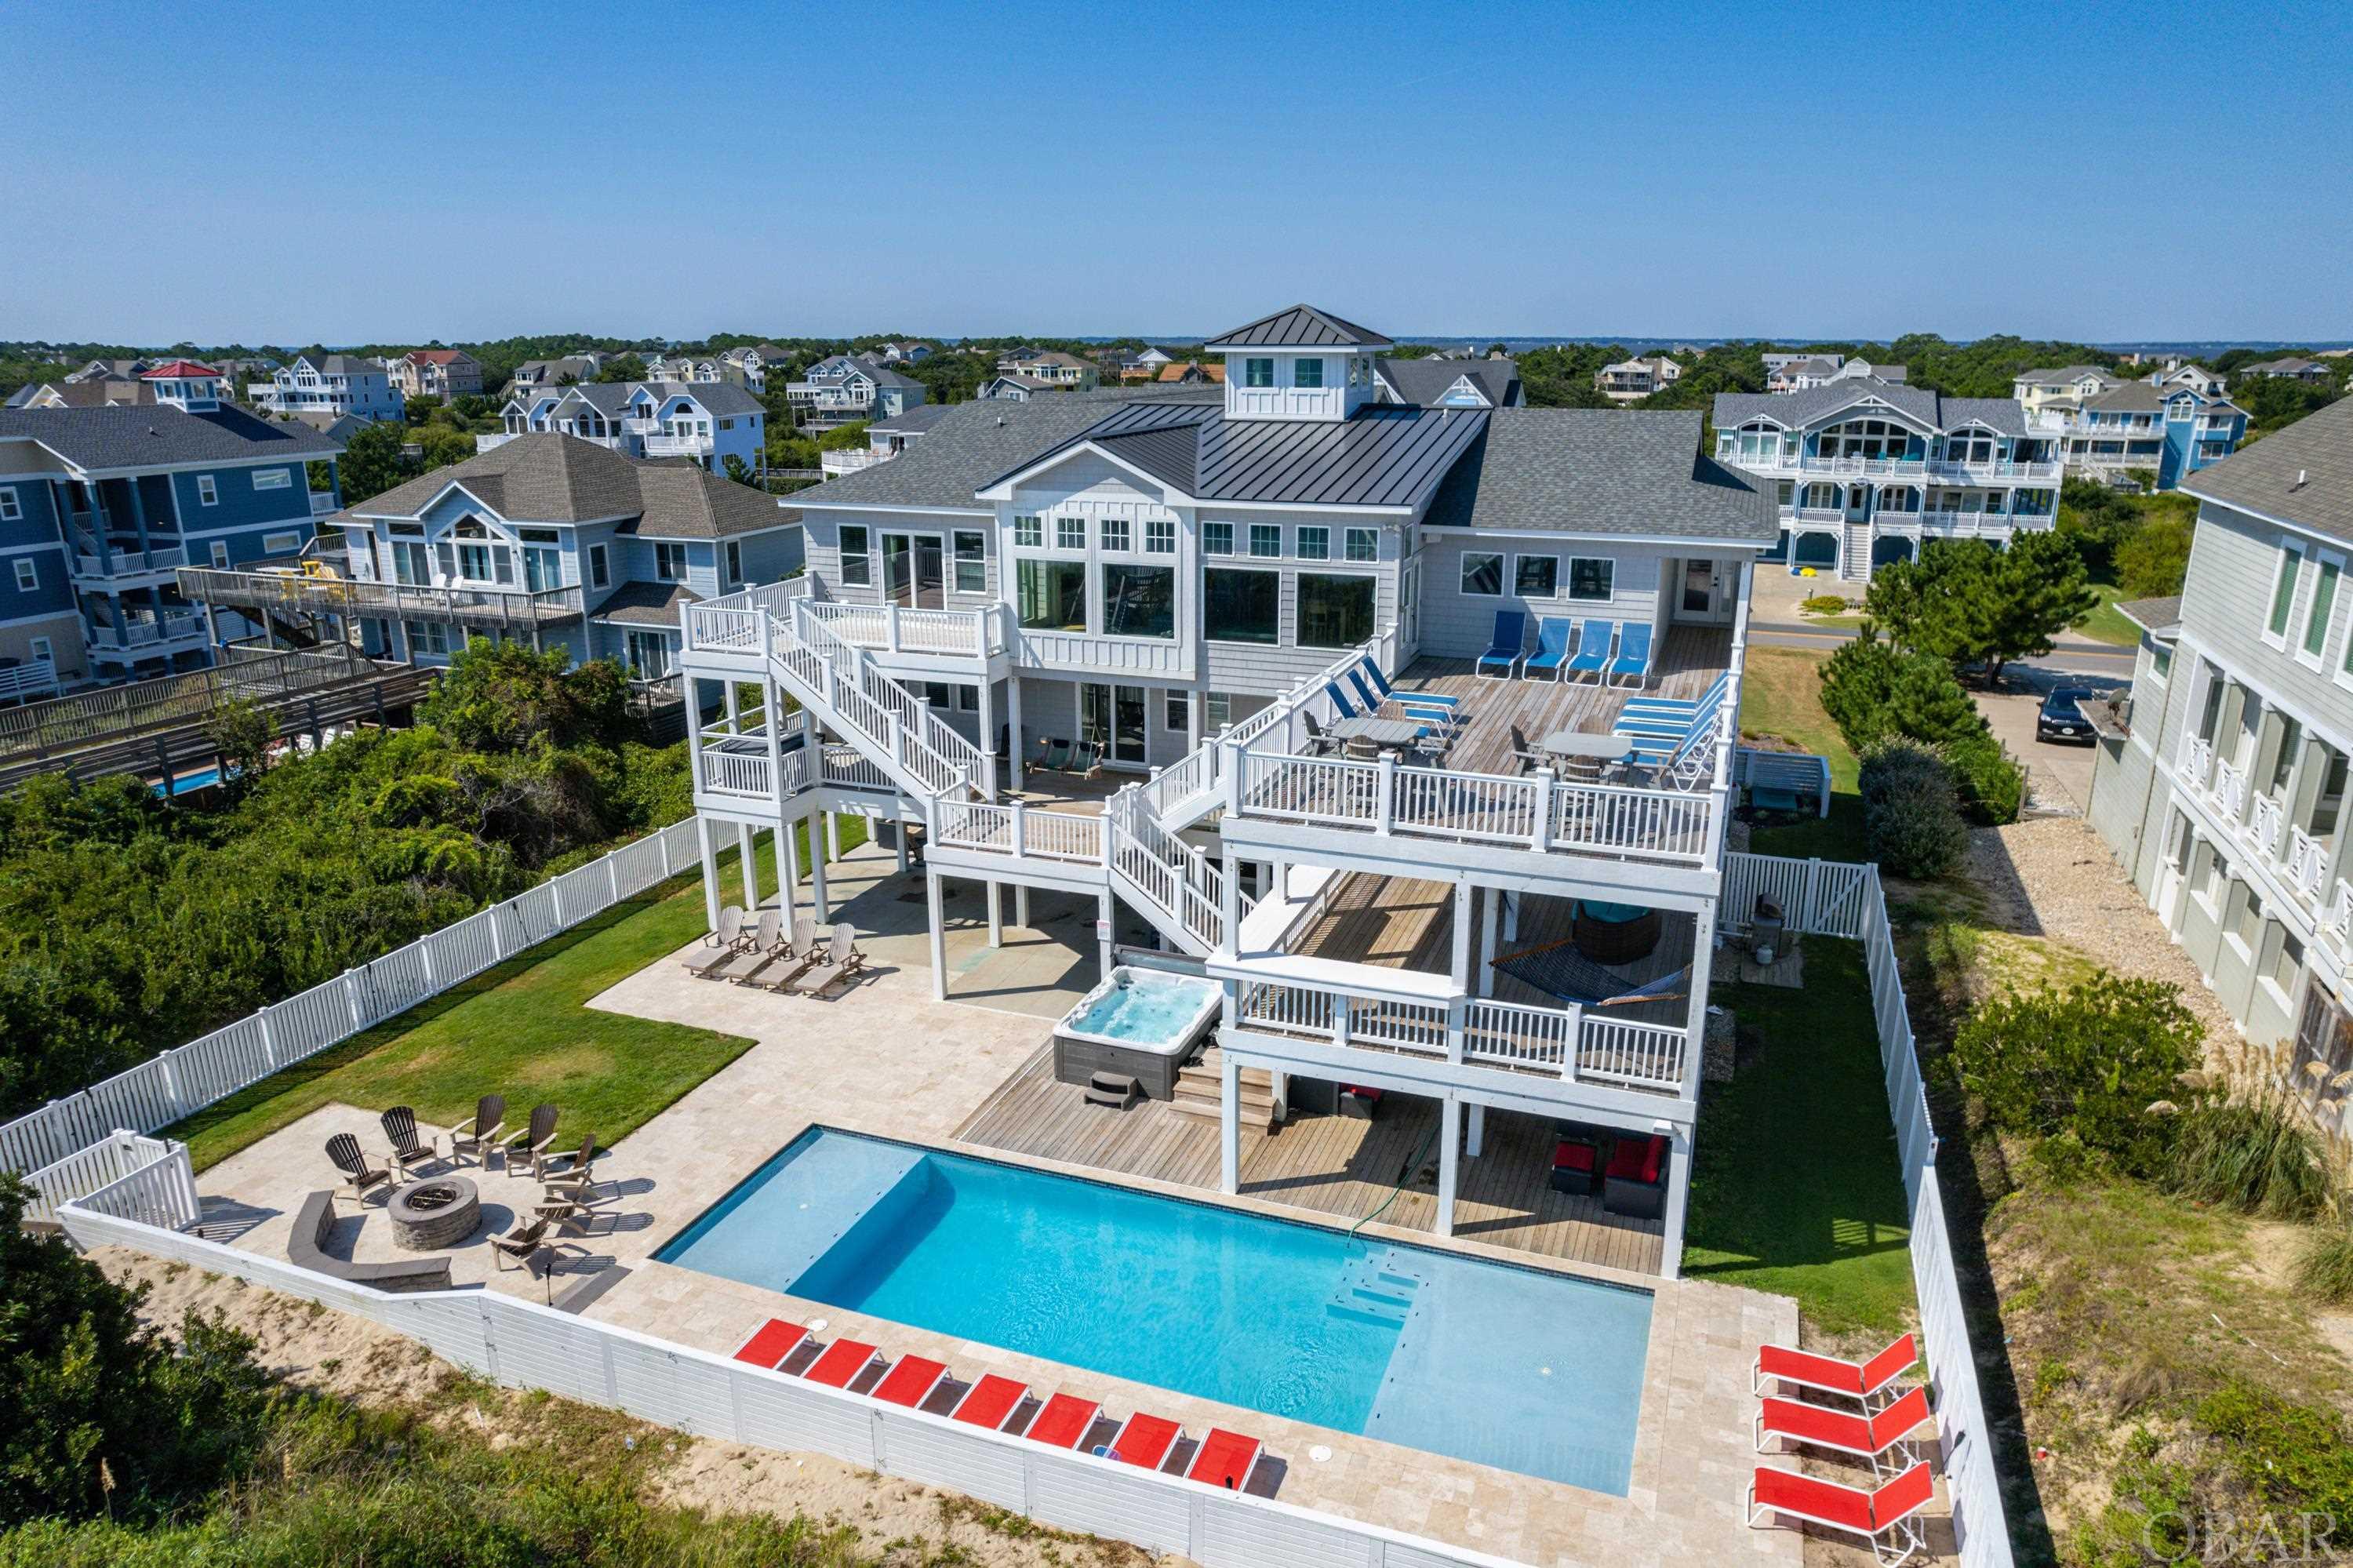 Fantastic Advertised Rate Income 2021: $437,412.75 and with Owner Weeks Added $484,258.  "Lighthouse Twelve"….Simply Wonderful ….... Being on the Ocean at Lighthouse Twelve, gives one and all Magnificent Oceanfront Beauty at it’s Best !  Glorious amounts of glass windows provide a multitude of Ocean Views, capturing dancing surf splashing before you.  ….even the Kitchen gets the splendor of more Ocean Views.  Lighthouse Twelve's Design is ideal for Weddings, Re-Unions, Conventions, and Loved Ones.  Luxury Furnishings abound, beckoning you to relax. This Location is precious, as being in the middle of the block creates a Private Beach feel just for your pleasure. Lighthouse Twelve’s fantastic multiple Decking Settings makes it so relaxing to just become part of the Ocean’s enriching ambience.  The inviting flow of this Oceanfront Beach Home embraces you with excitement, as Lighthouse Twelve is designed for FUN.  The Top Level Great Room  commands incredible Ocean Views with Four Large Glass Panel Windows !  The Living Area has Large Flat Screen, an easy lite Fireplace, Majestic Dining Table for 18  with grand Ocean Views. Huge Kitchen convenient to all the action and has excellent Ocean Views too .... and Counter Seating for Four more. Just off the Great Room is a Setting Area with Wet Bar, Ice Maker, and cabinetry of glassware to choose from, for your libation to be refreshing and immediate.  Enjoy an especially nice & separate private Recreation Room with Billiards, Kitchenette, Flat Screen, Full Size Fridge, & Ocean Views too.  As the Ocean Waves are splashing on shore of the wide Beautiful Beach of Corolla, you see and hear the Ocean from all angles with Oceanfront Decking in abundance ! Ideal for Outdoor Dining, ample Sun Decks, Gatherings in the Shade, refreshing Ocean Breezes, and enchanting Water Views.  Of the Twelve Bedrooms w Private Baths, Four are convenient to the Top Level living areas.  Seven Bedrooms are on the Mid Level, including one as a combo Bedroom & Mid Level Den. The advantage of the Mid Level Den Design is that one is greeted with an Ocean View as soon as you walk in the Front Entry Foyer.   Convenience of an Elevator makes Life Easy.  Tucked away also on the Mid Level, is the separate Theater Room, to enjoy movies or the big game ! Outdoors there are even more additional Decks and Lounge Chairs at the Top Level, Mid Level, Dune Top, Poolside, and around the outdoor Fire Pit, too.  At Poolside, Wet Bar with Two Full Size Fridges, Large Flat Screen TV and an abundance of Cushioned Sofas, which lets the party continuously flow from the Top Level to the Poolside Level.  ! One can stroll along the Beach for miles…all of which makes this shorefront Beach Home as “One to Cherish”.  The Top of the Dune Deck and Lounge Area, is perfect to enjoy refreshments and to be revitalized by the tropical ocean breeze.  Various outdoor seating and decking provides a multitude of perspectives to enjoy the ocean essence.  All separate, yet close, to easily re-engage in all the action. The Pool & Two Hot Tub offers more ways to enjoy the Best Setting on the Ocean.